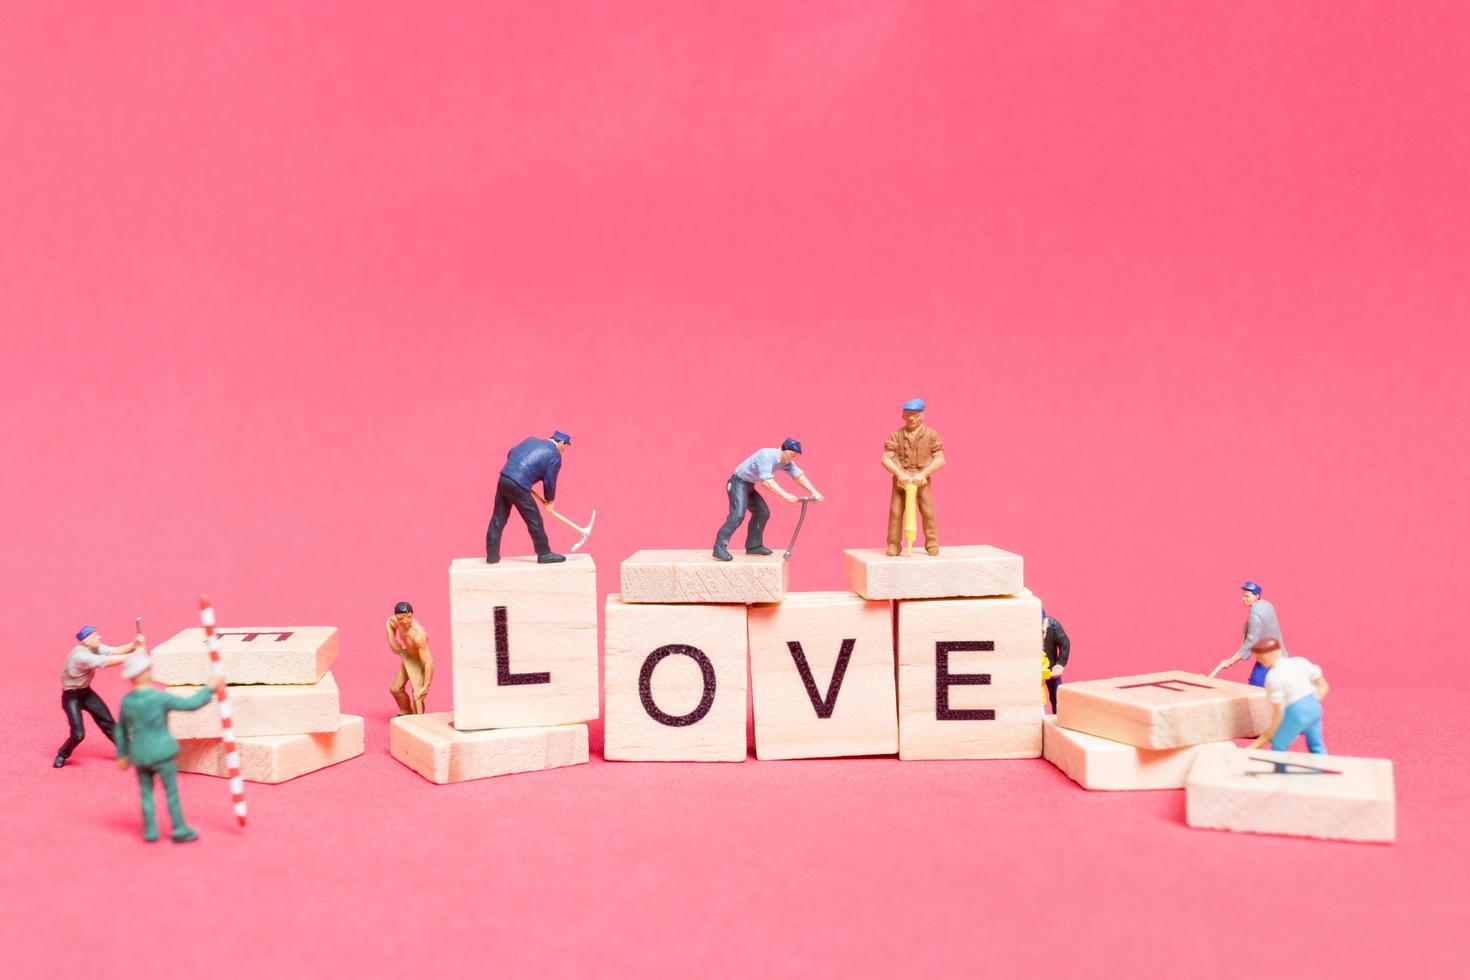 Miniature worker teaming up to build the word Love on wooden blocks with a pink background, Valentine's Day concept photo